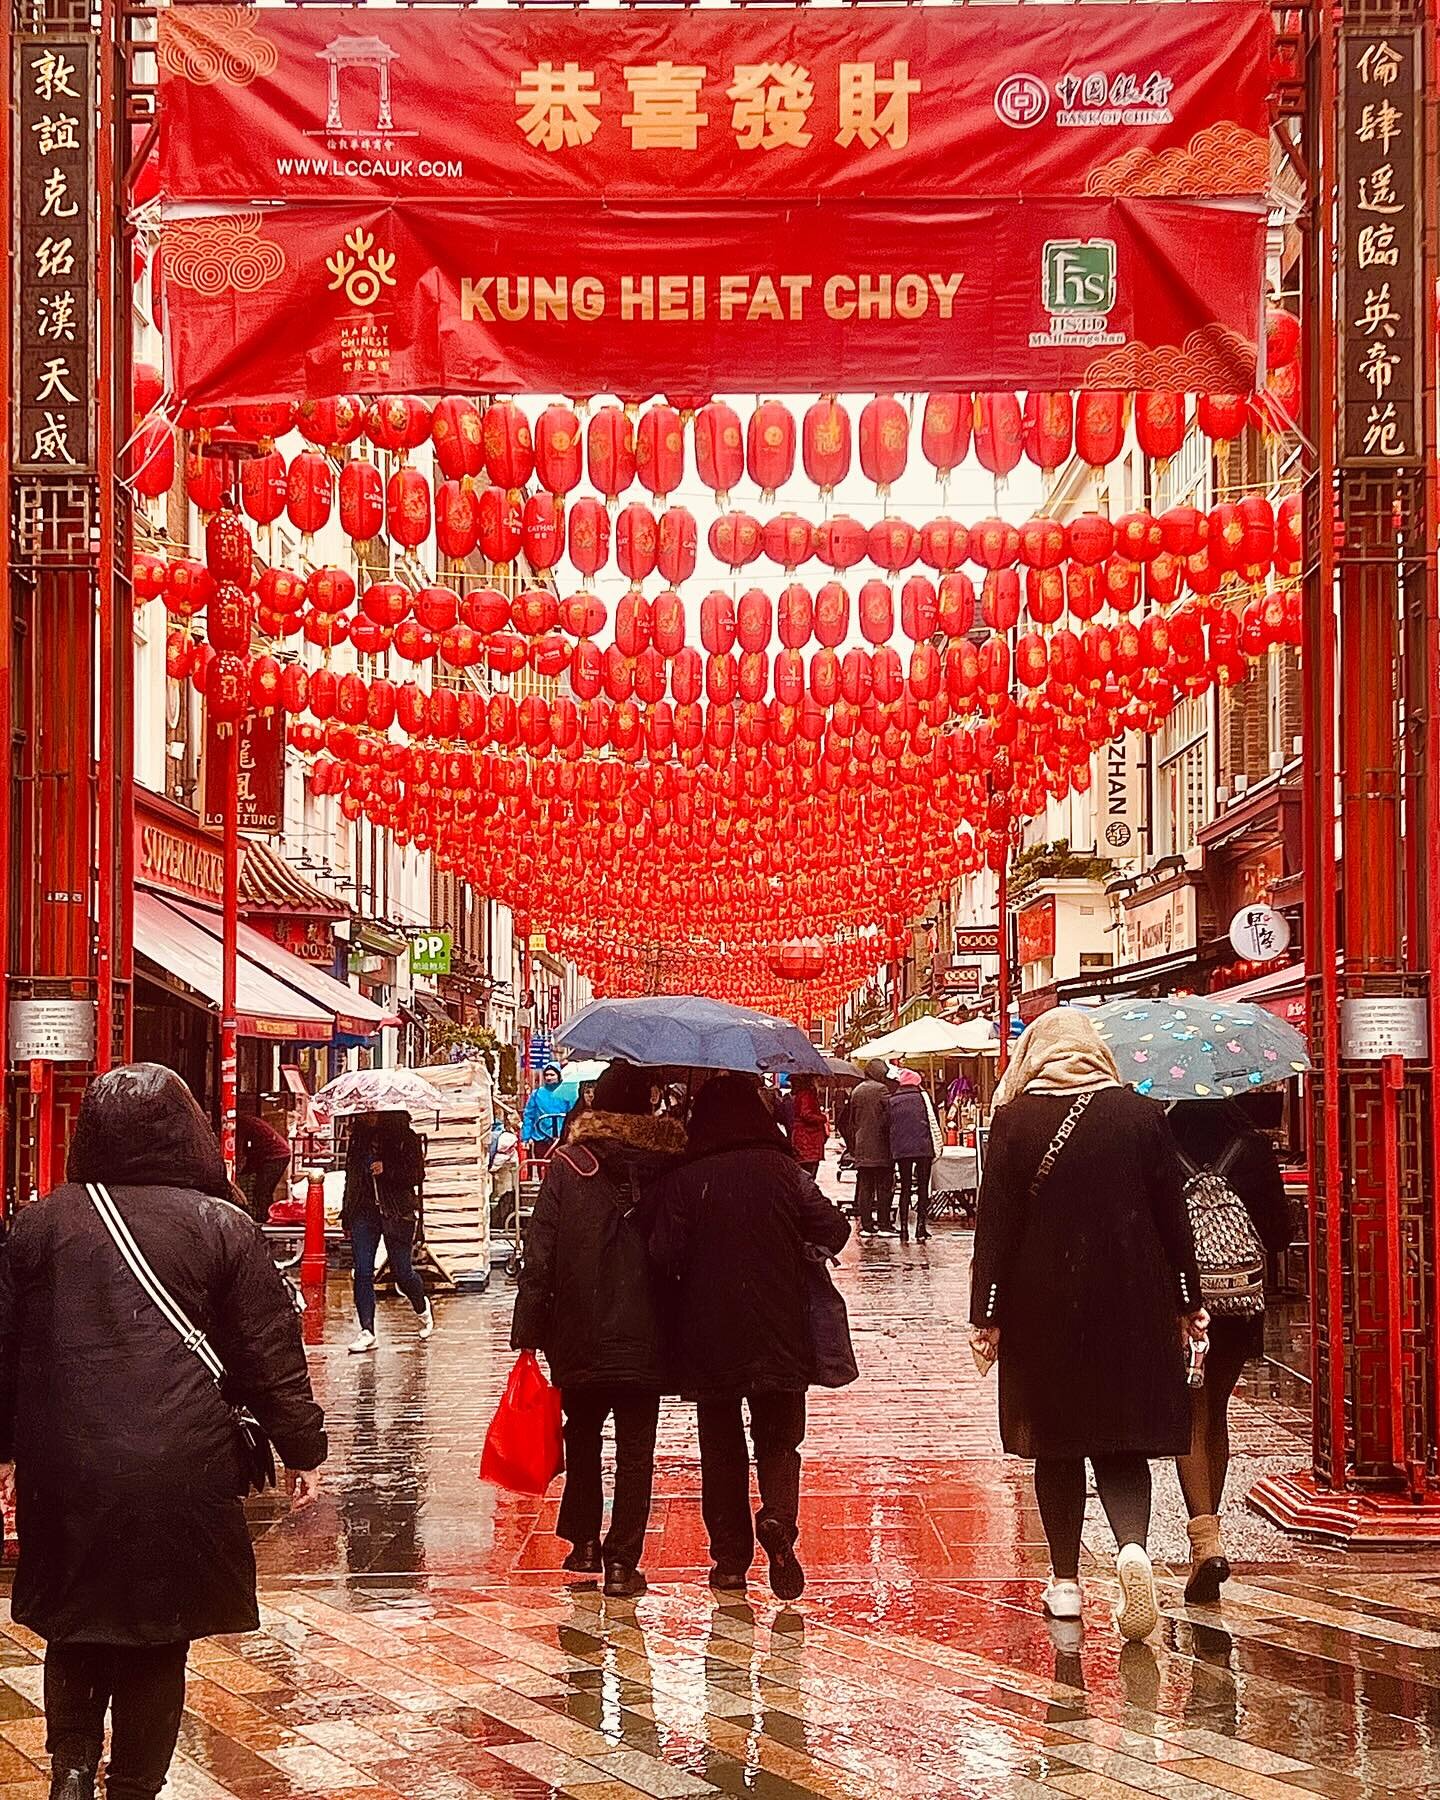 Expected Red Theory? 🤔 #IYKYK #unexpectedredtheory #red #chinatown #london #productiondesignerontour